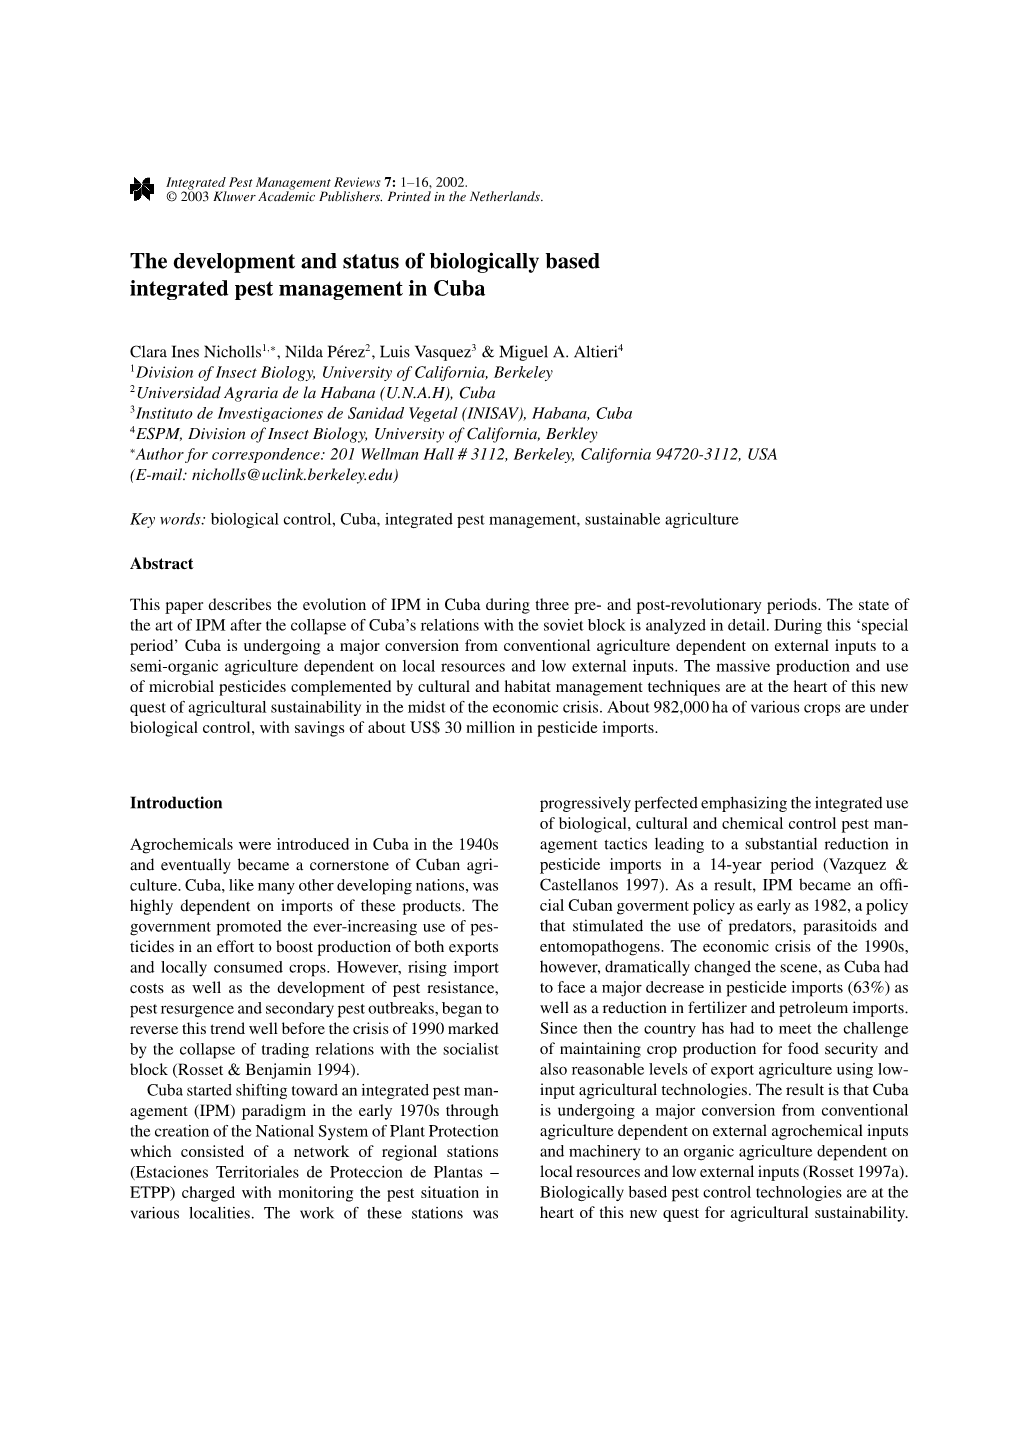 The Development and Status of Biologically Based Integrated Pest Management in Cuba